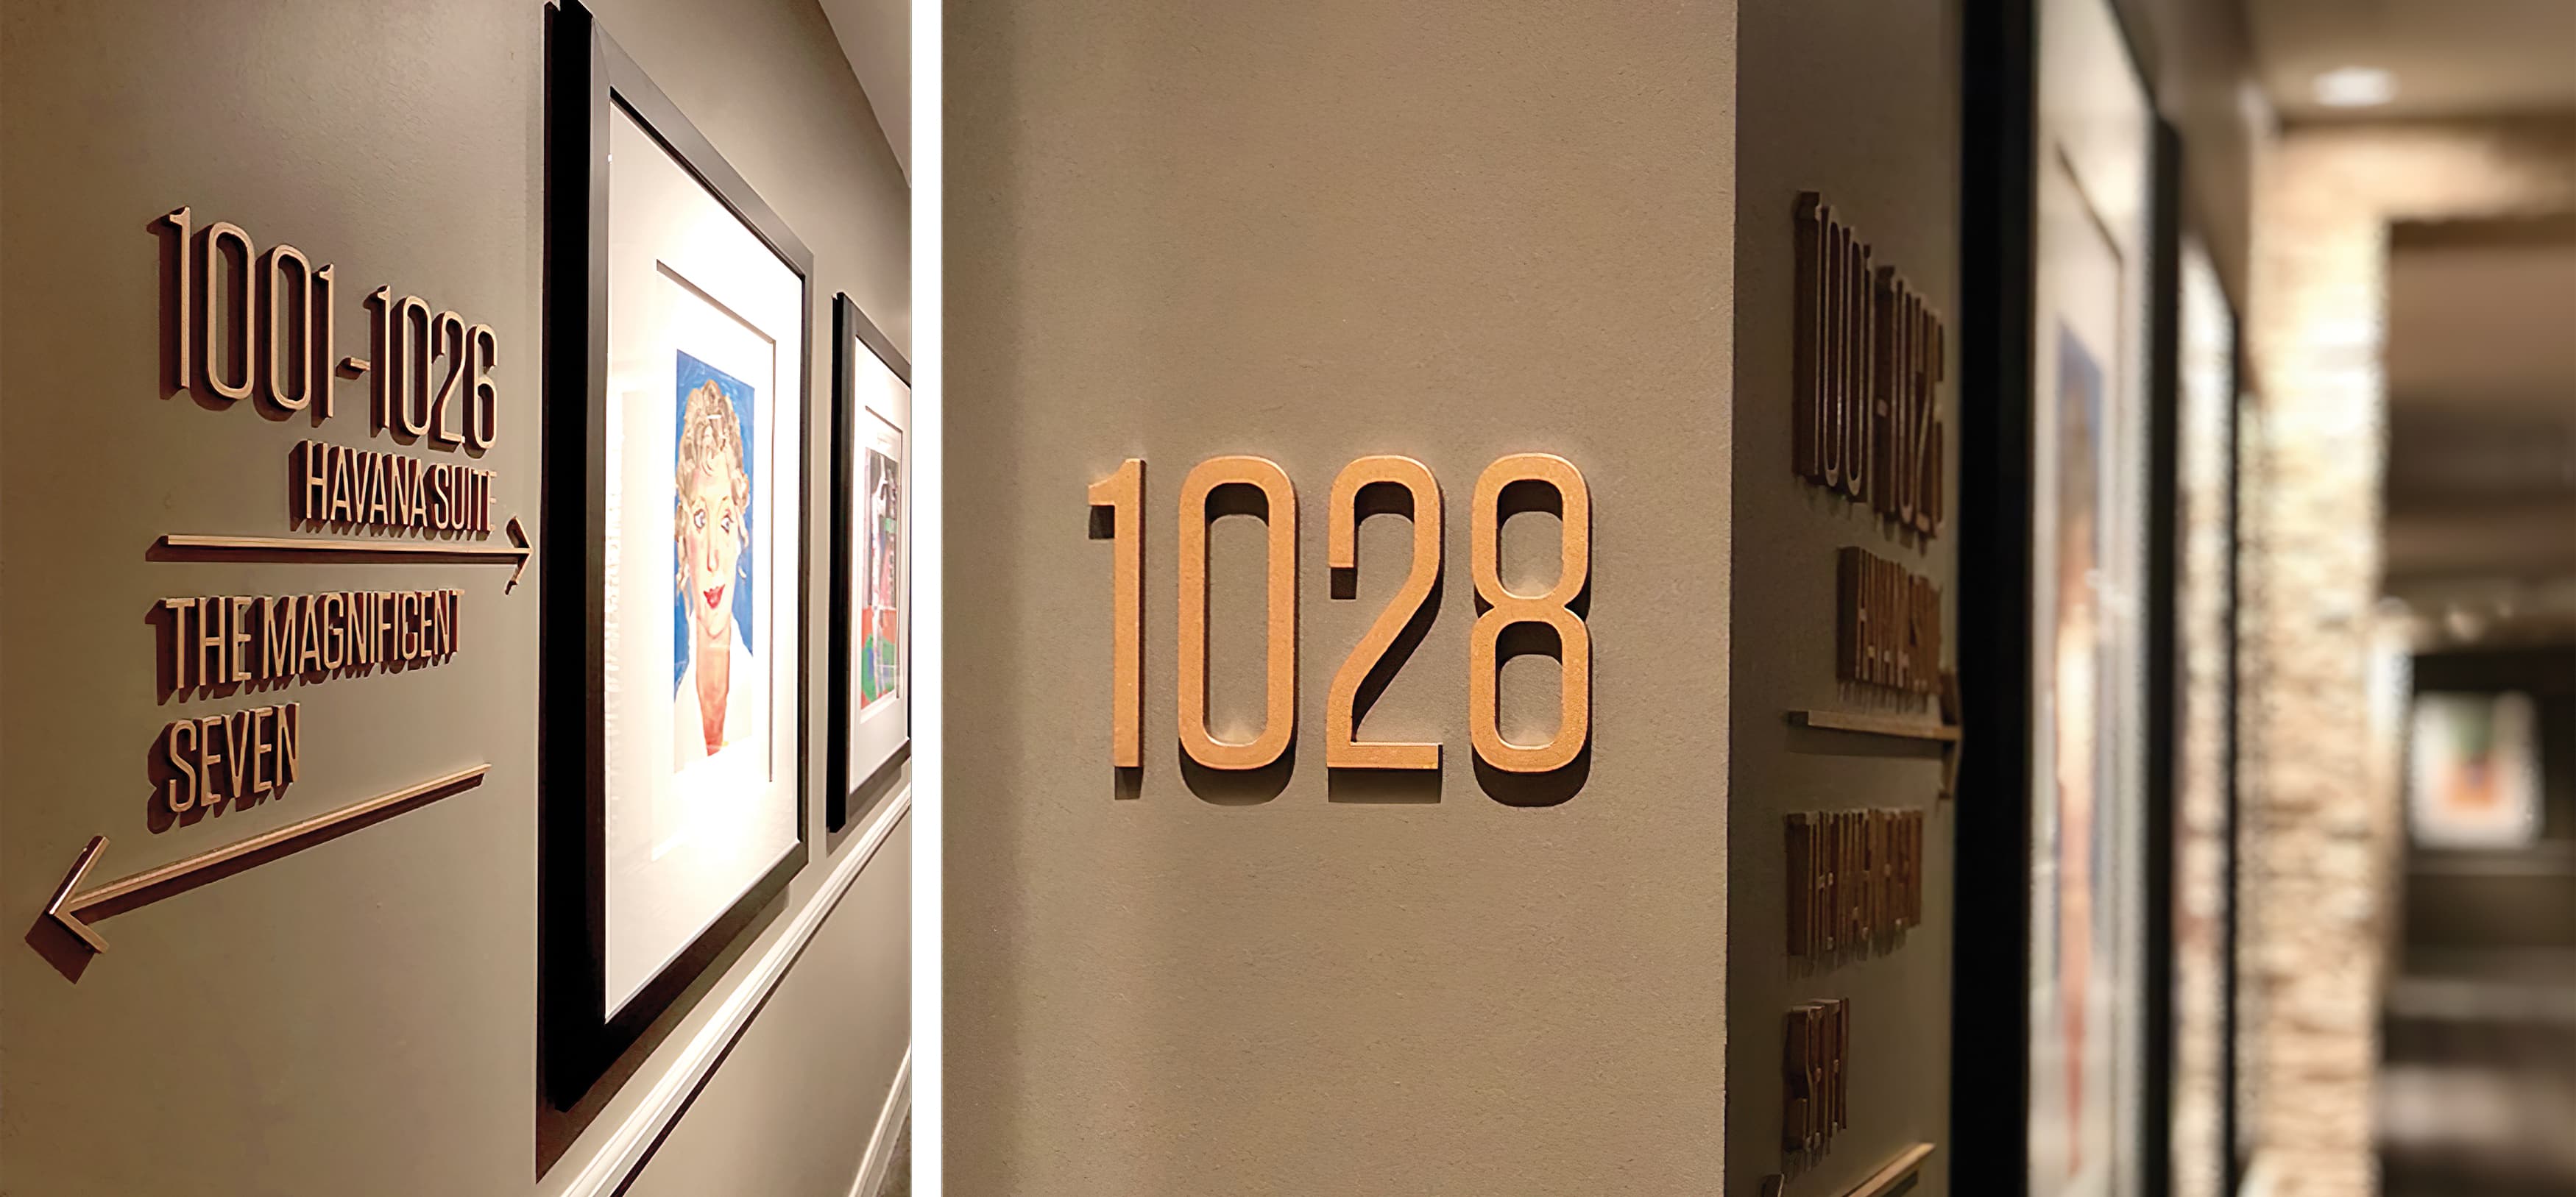 RSM Design prepared environmental signage and wayfinding package for the hospitality and residential buildings of Hotel Zaza, a boutique hotel in Houston, Texas. Hospitality Signage Design.